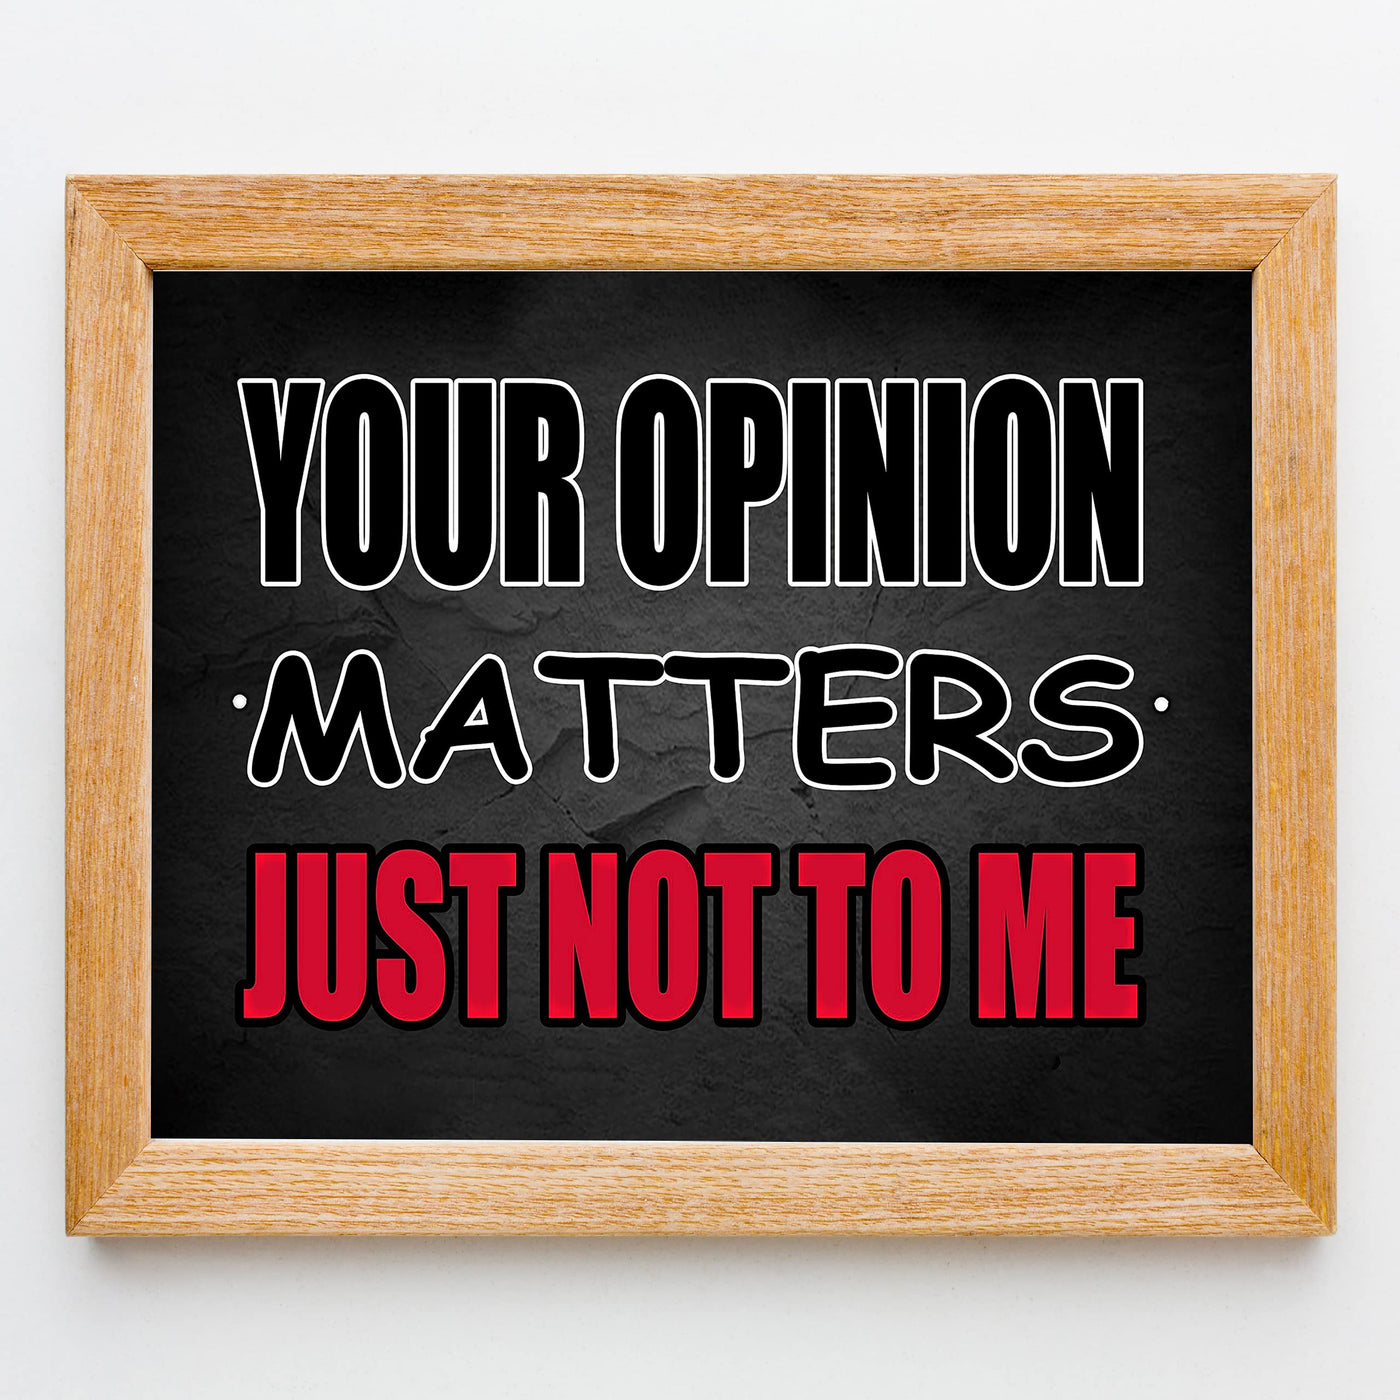 Your Opinion Matters-Just Not To Me Funny Sarcastic Wall Sign-10 x 8" Typographic Art Print-Ready to Frame. Humorous Decor for Home-Office-Bar-Shop-Cave. Fun Desk-Cubicle Sign! Great Novelty Gift!